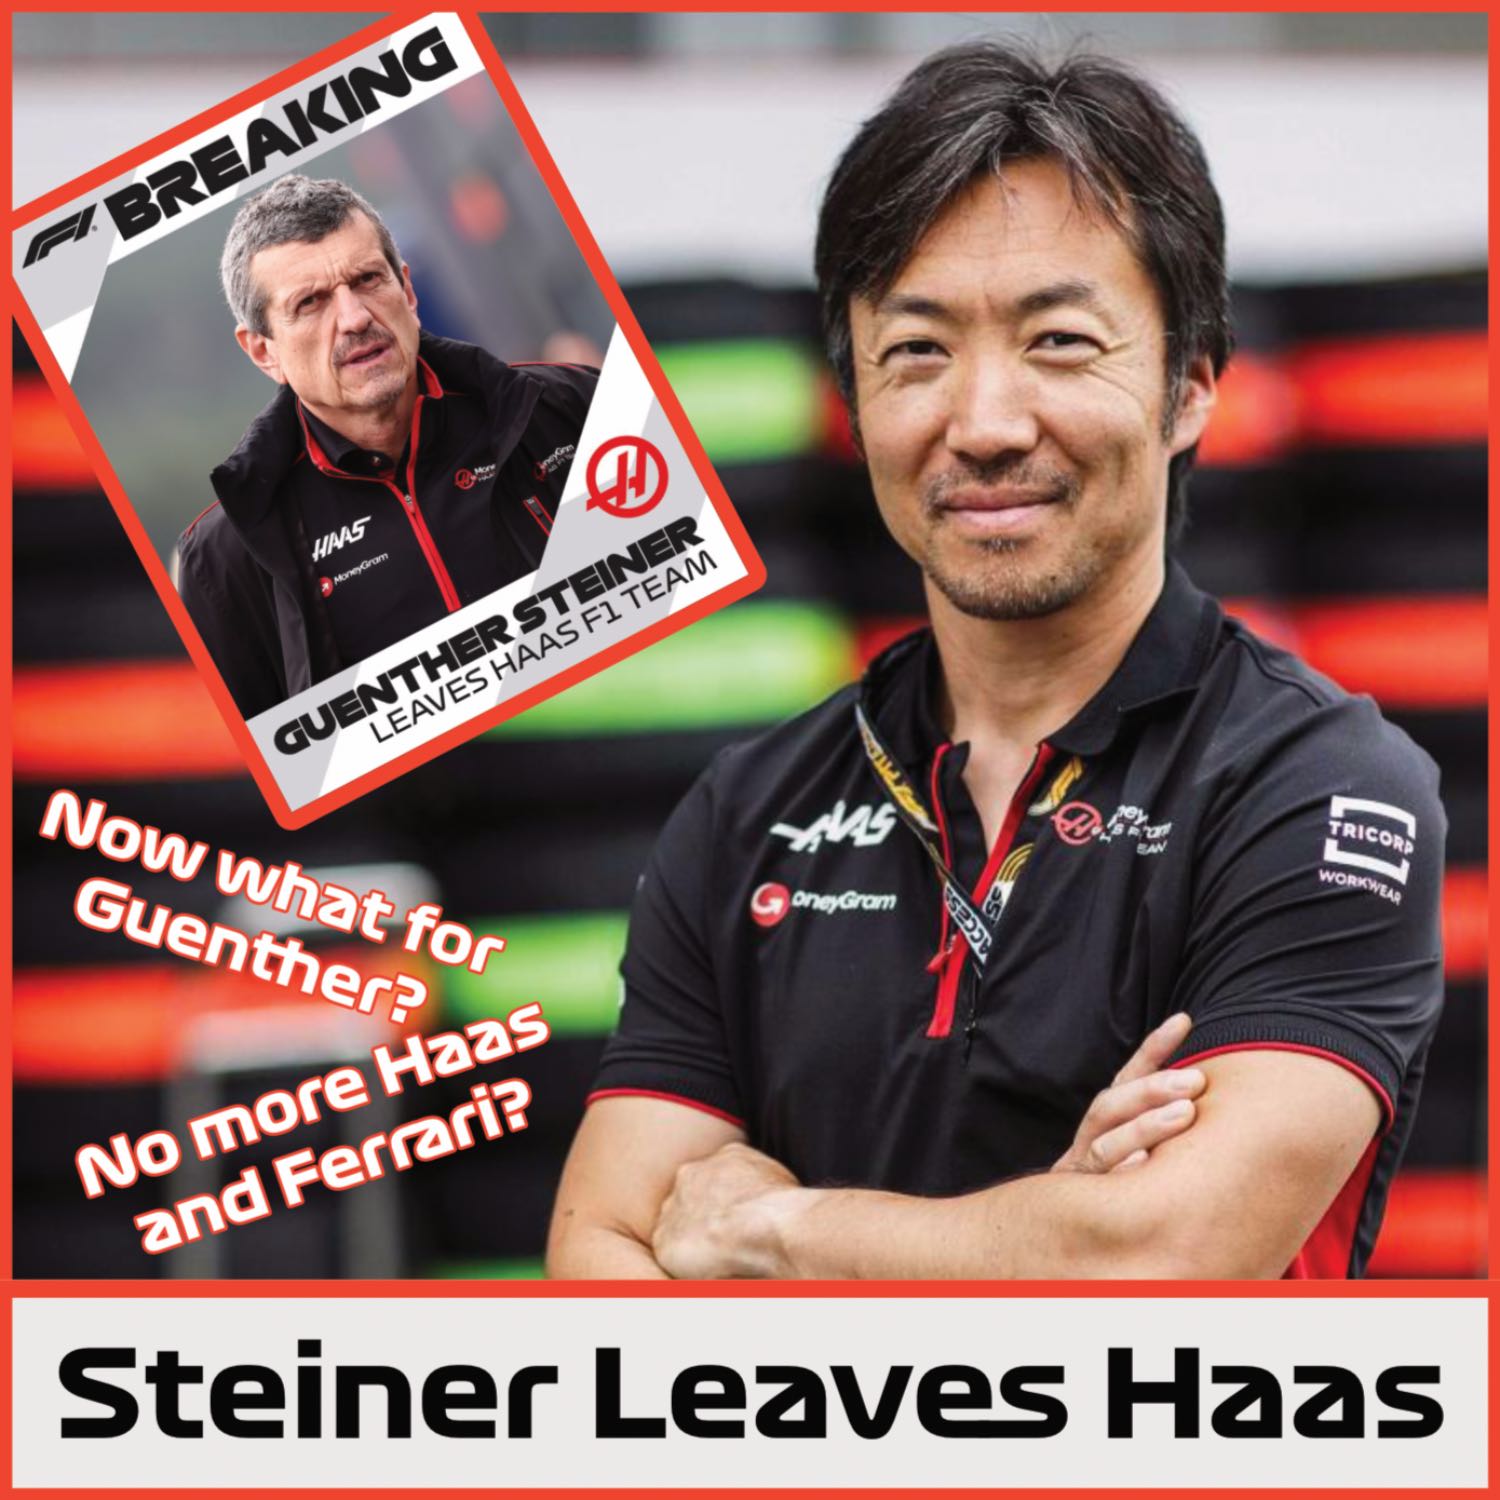 Guenther Steiner Leaves Haas - What the hell Haas happened?